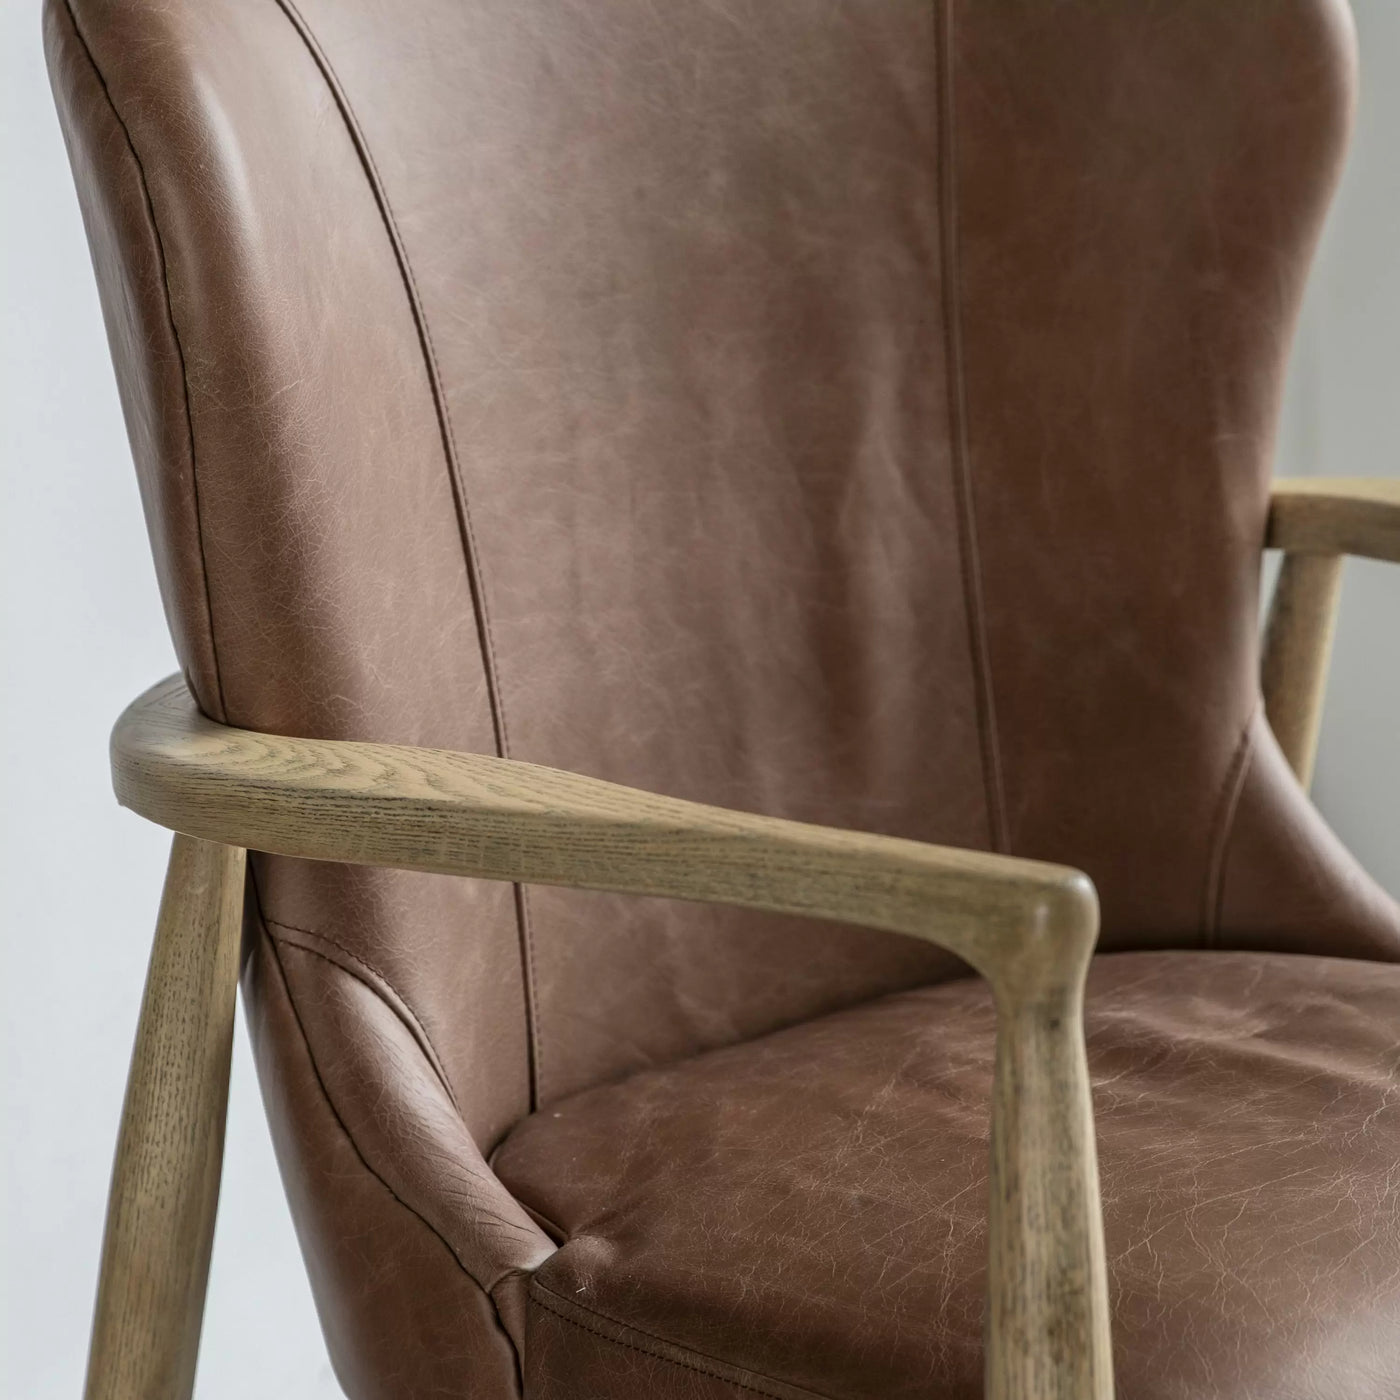 Latchbrook Armchair Ant Brown Leather 670x640x900mm